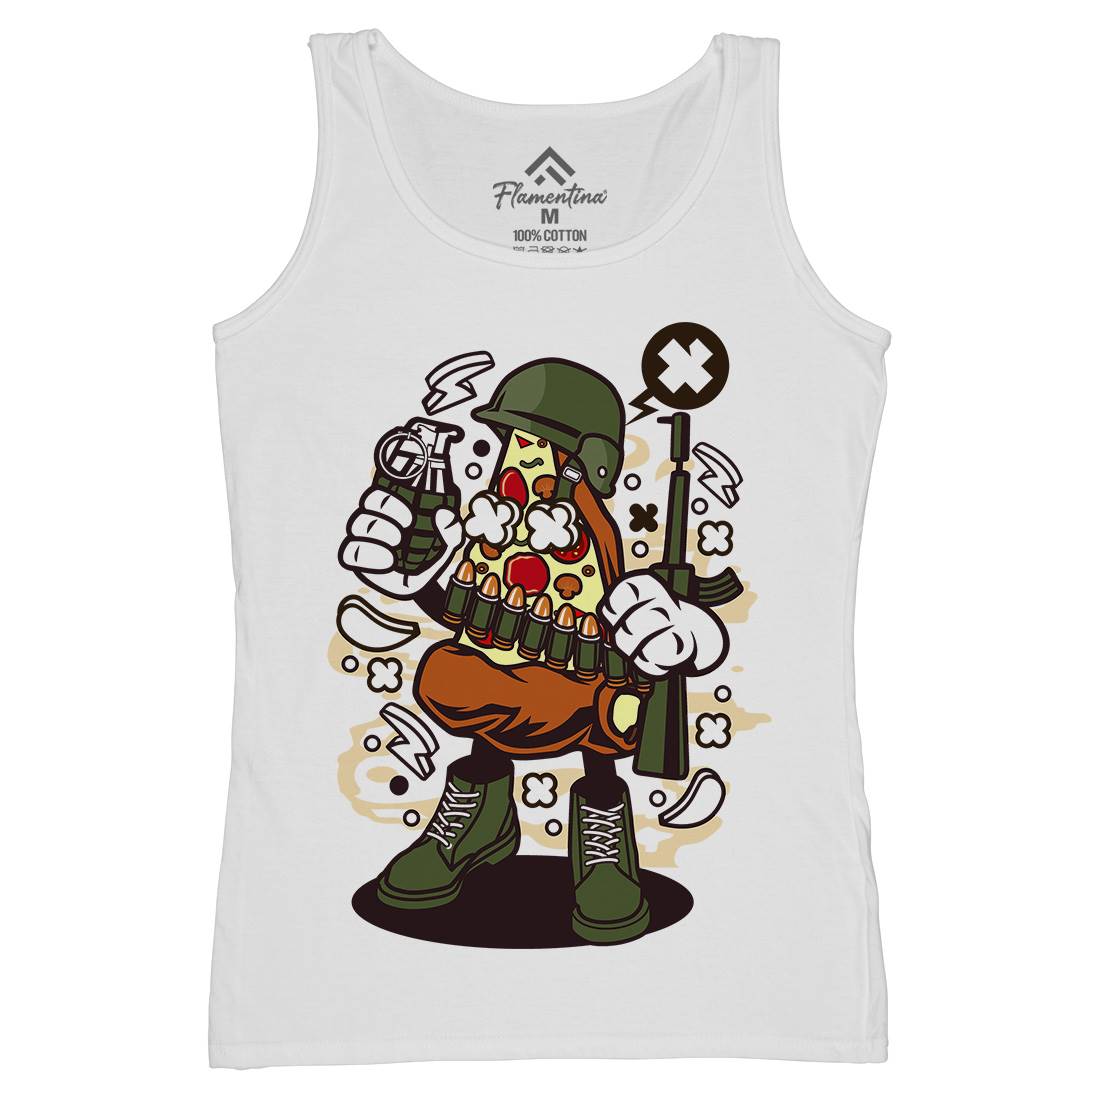 Soldier Pizza Womens Organic Tank Top Vest Army C254